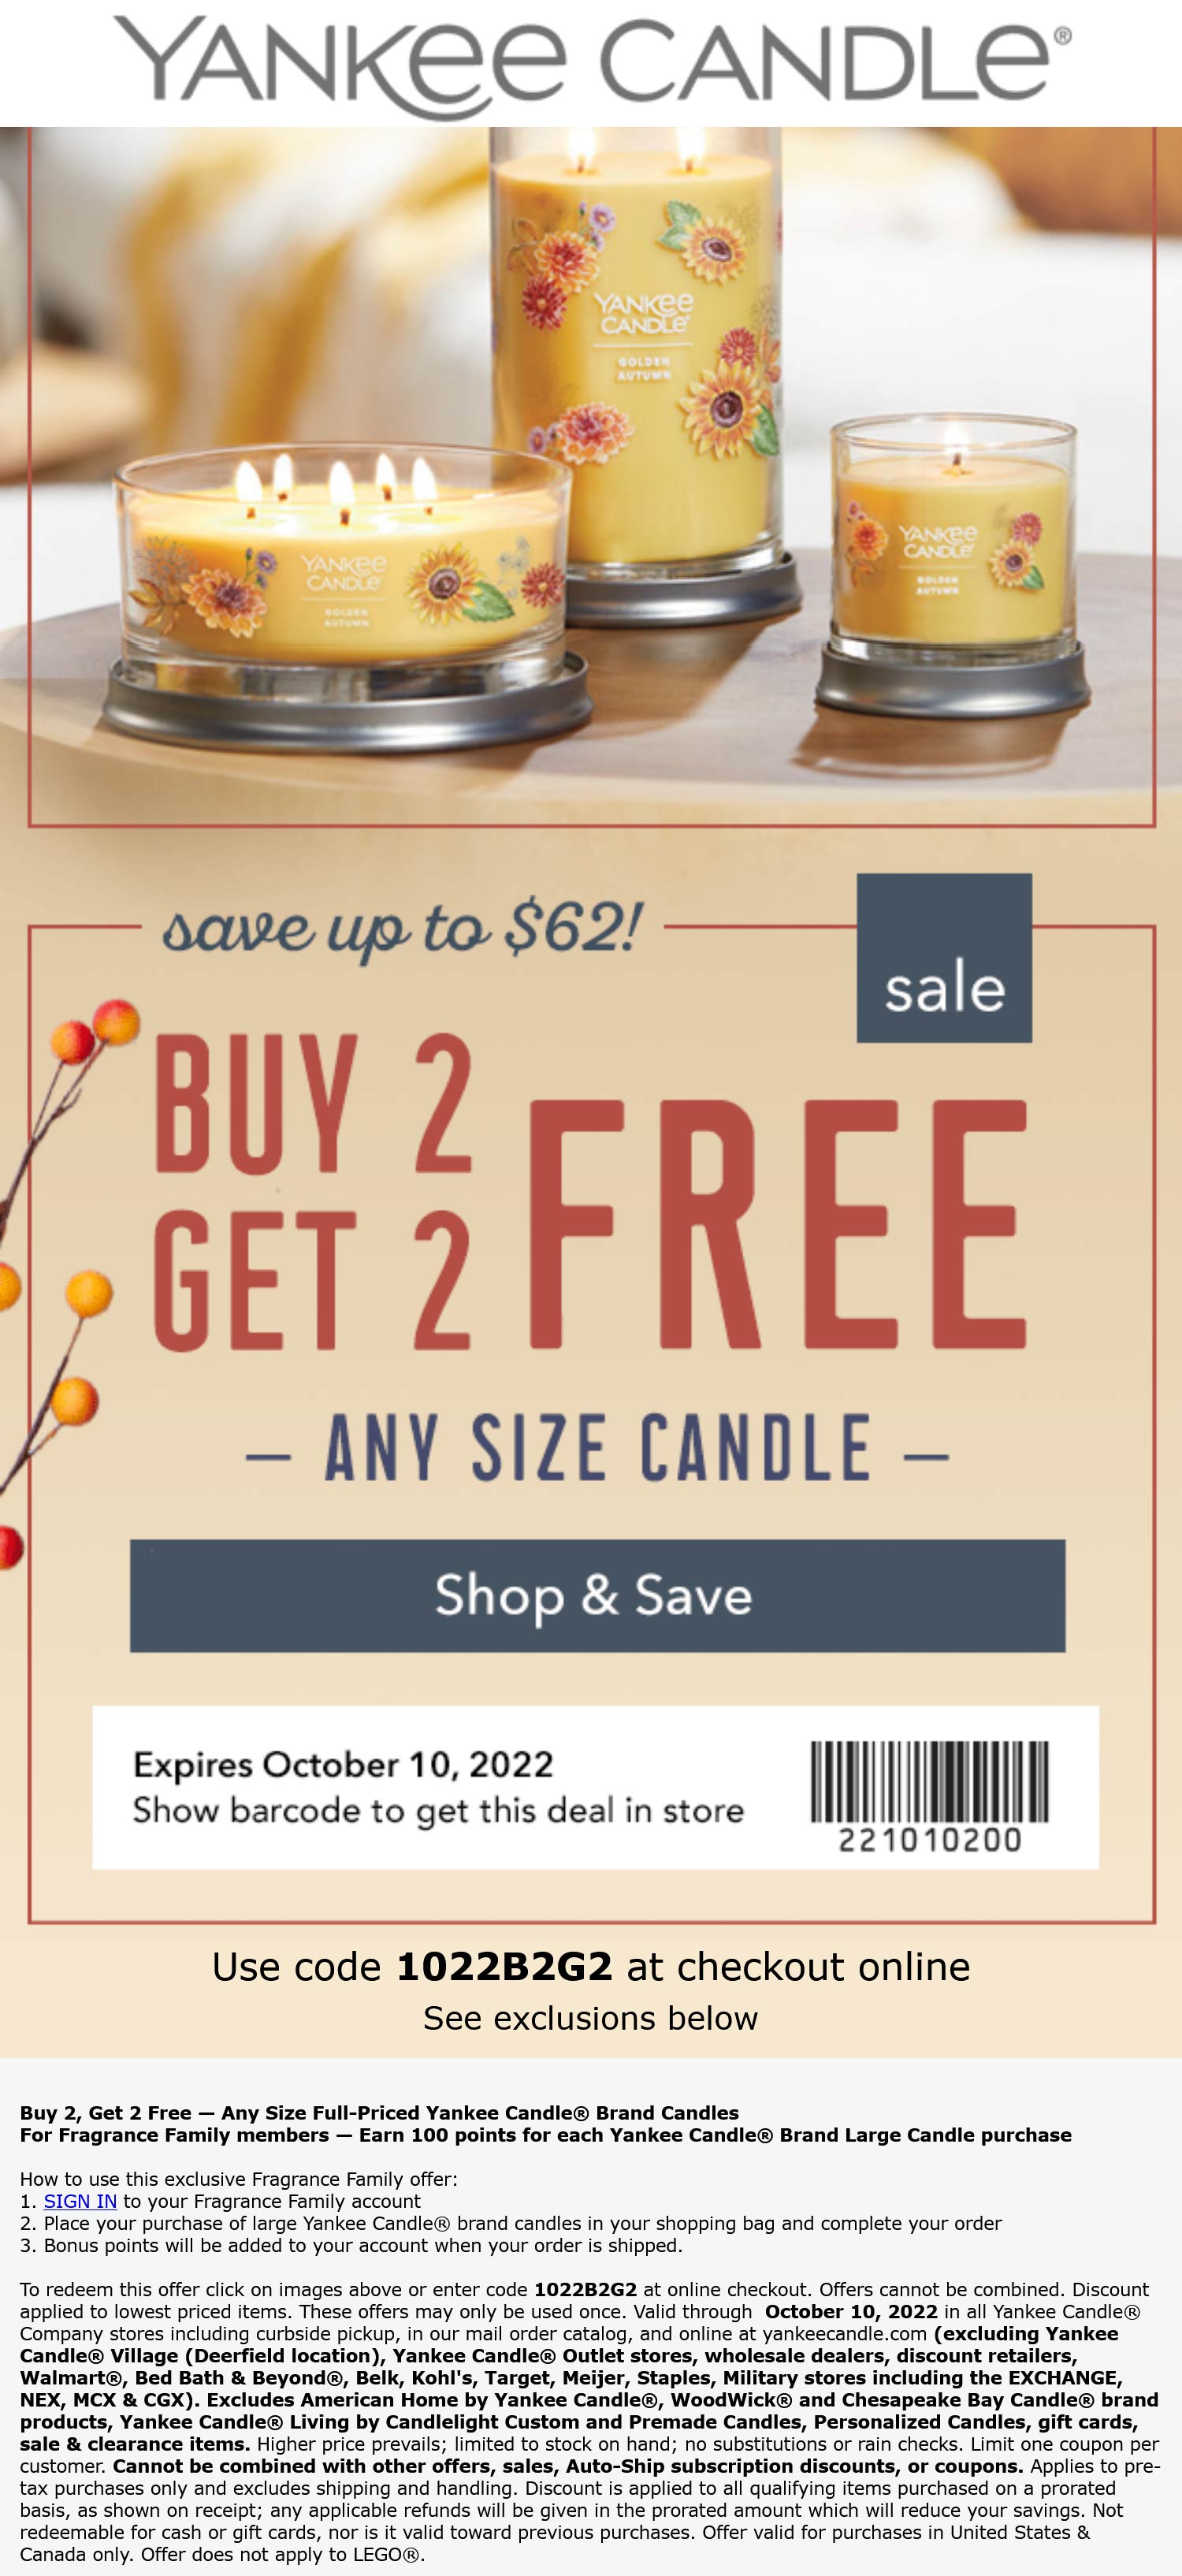 Yankee Candle stores Coupon  4-for-2 on candles at Yankee Candle, or online via promo code 1022B2G2 #yankeecandle 